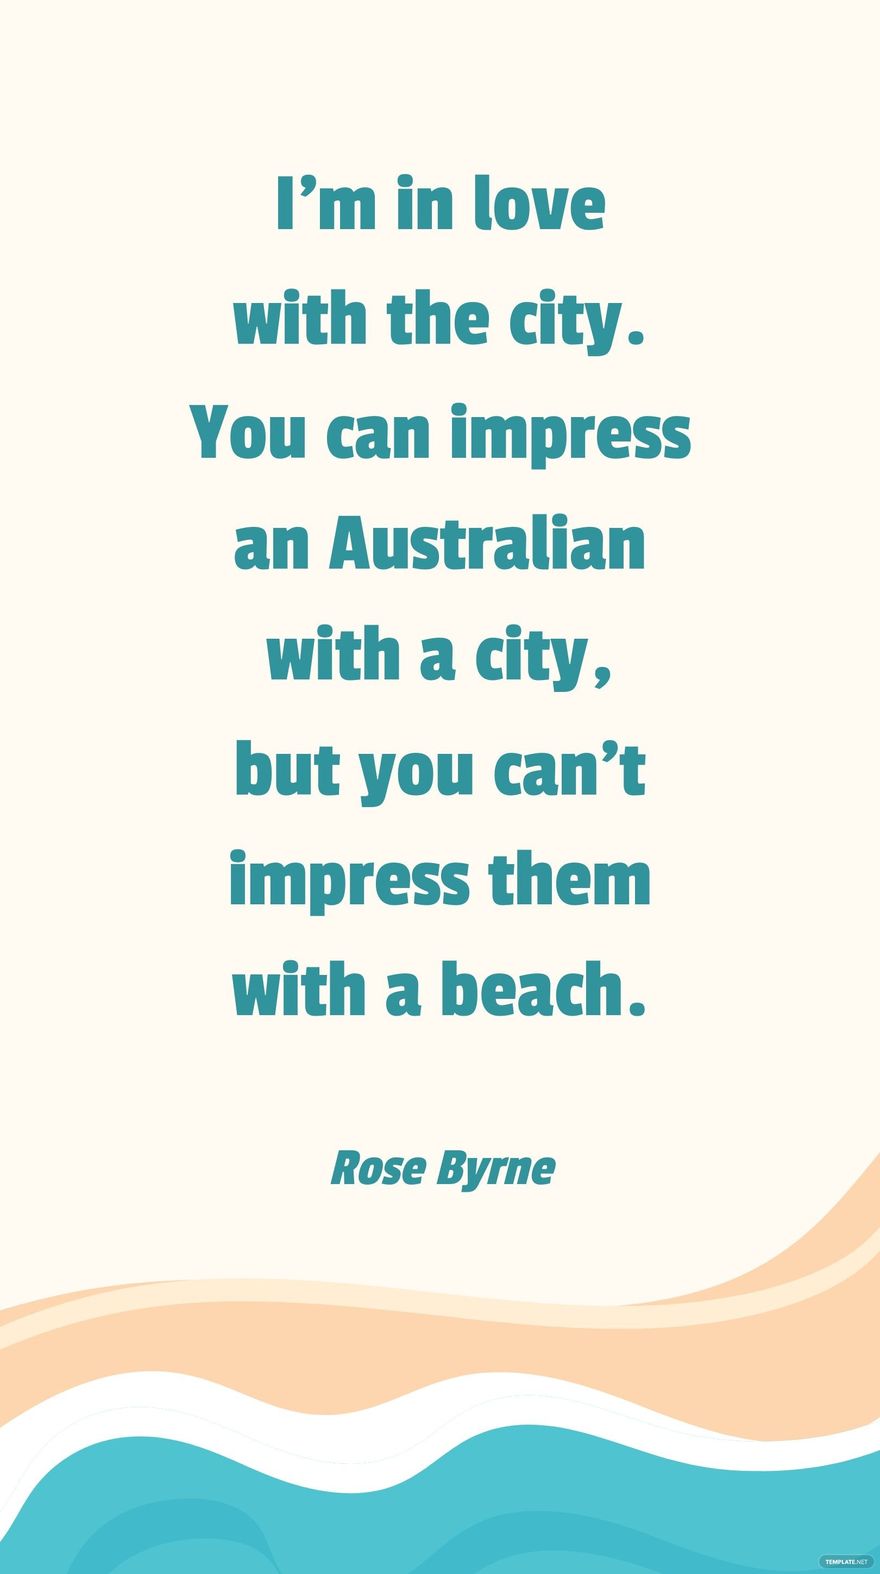 Rose Byrne - I'm in love with the city. You can impress an Australian with a city, but you can't impress them with a beach.